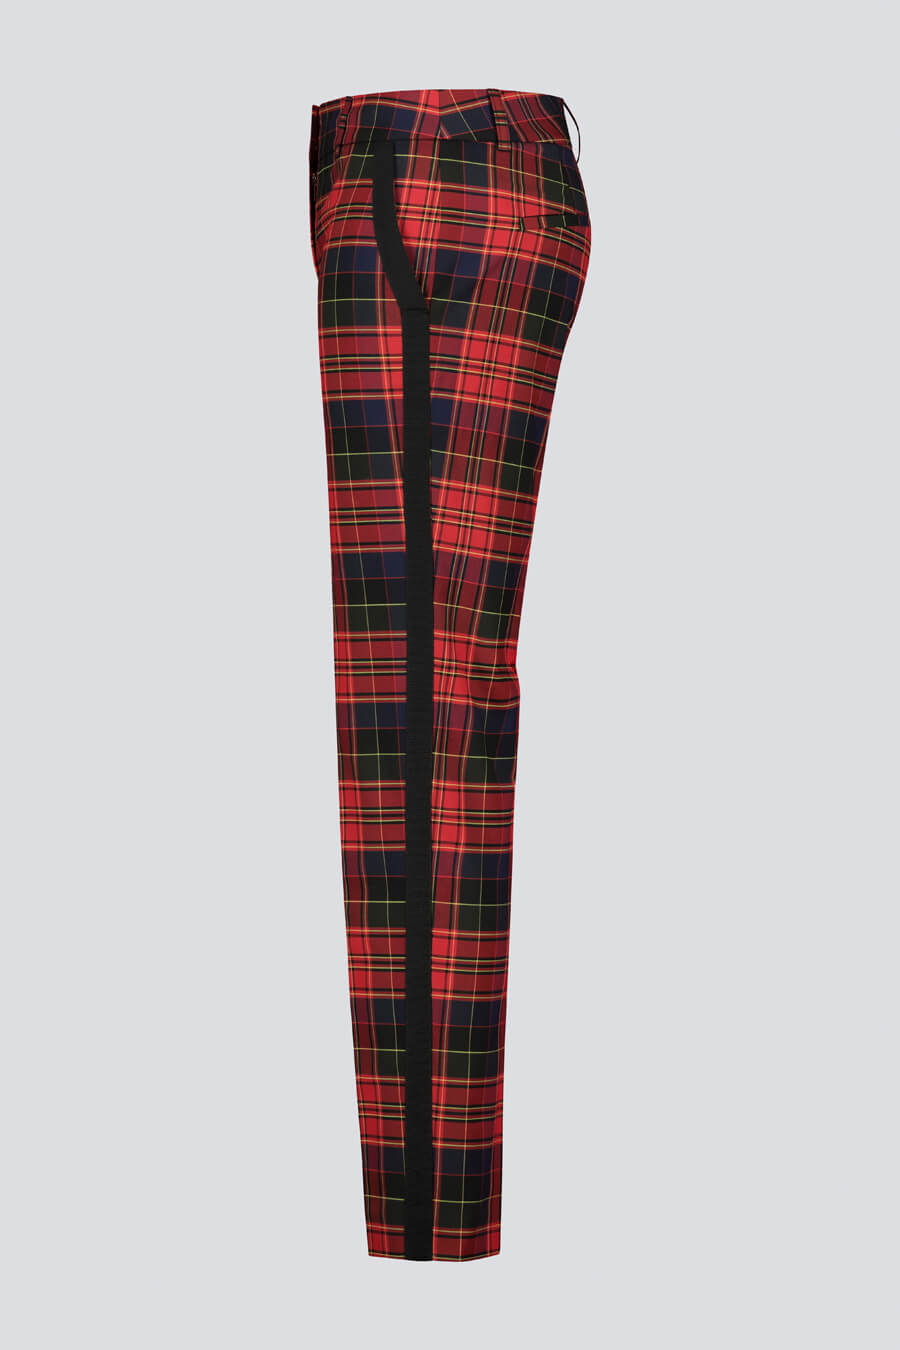 Slim-fit red and black plaid pants with black satin stripe on side